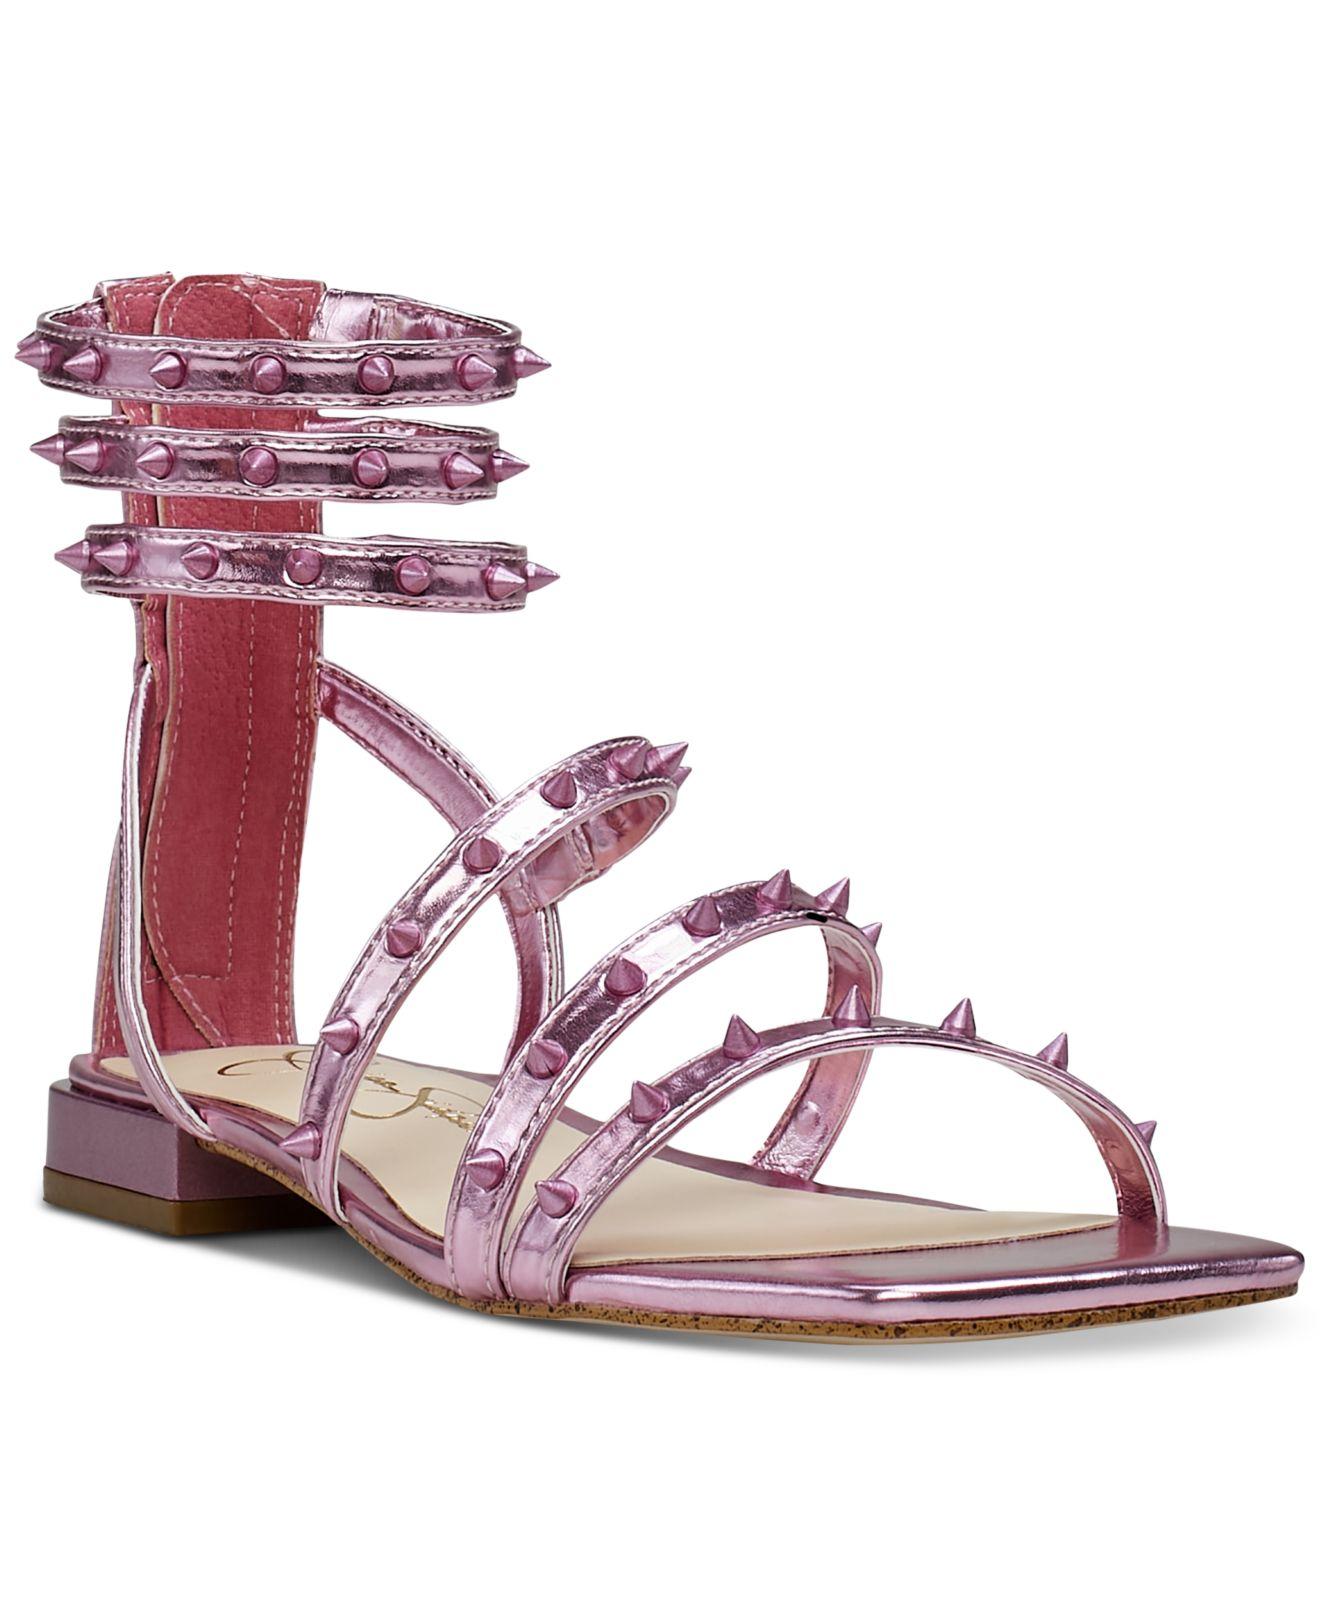 Jessica Simpson Cenedra Studded Strappy Gladiator Sandals in Pink | Lyst